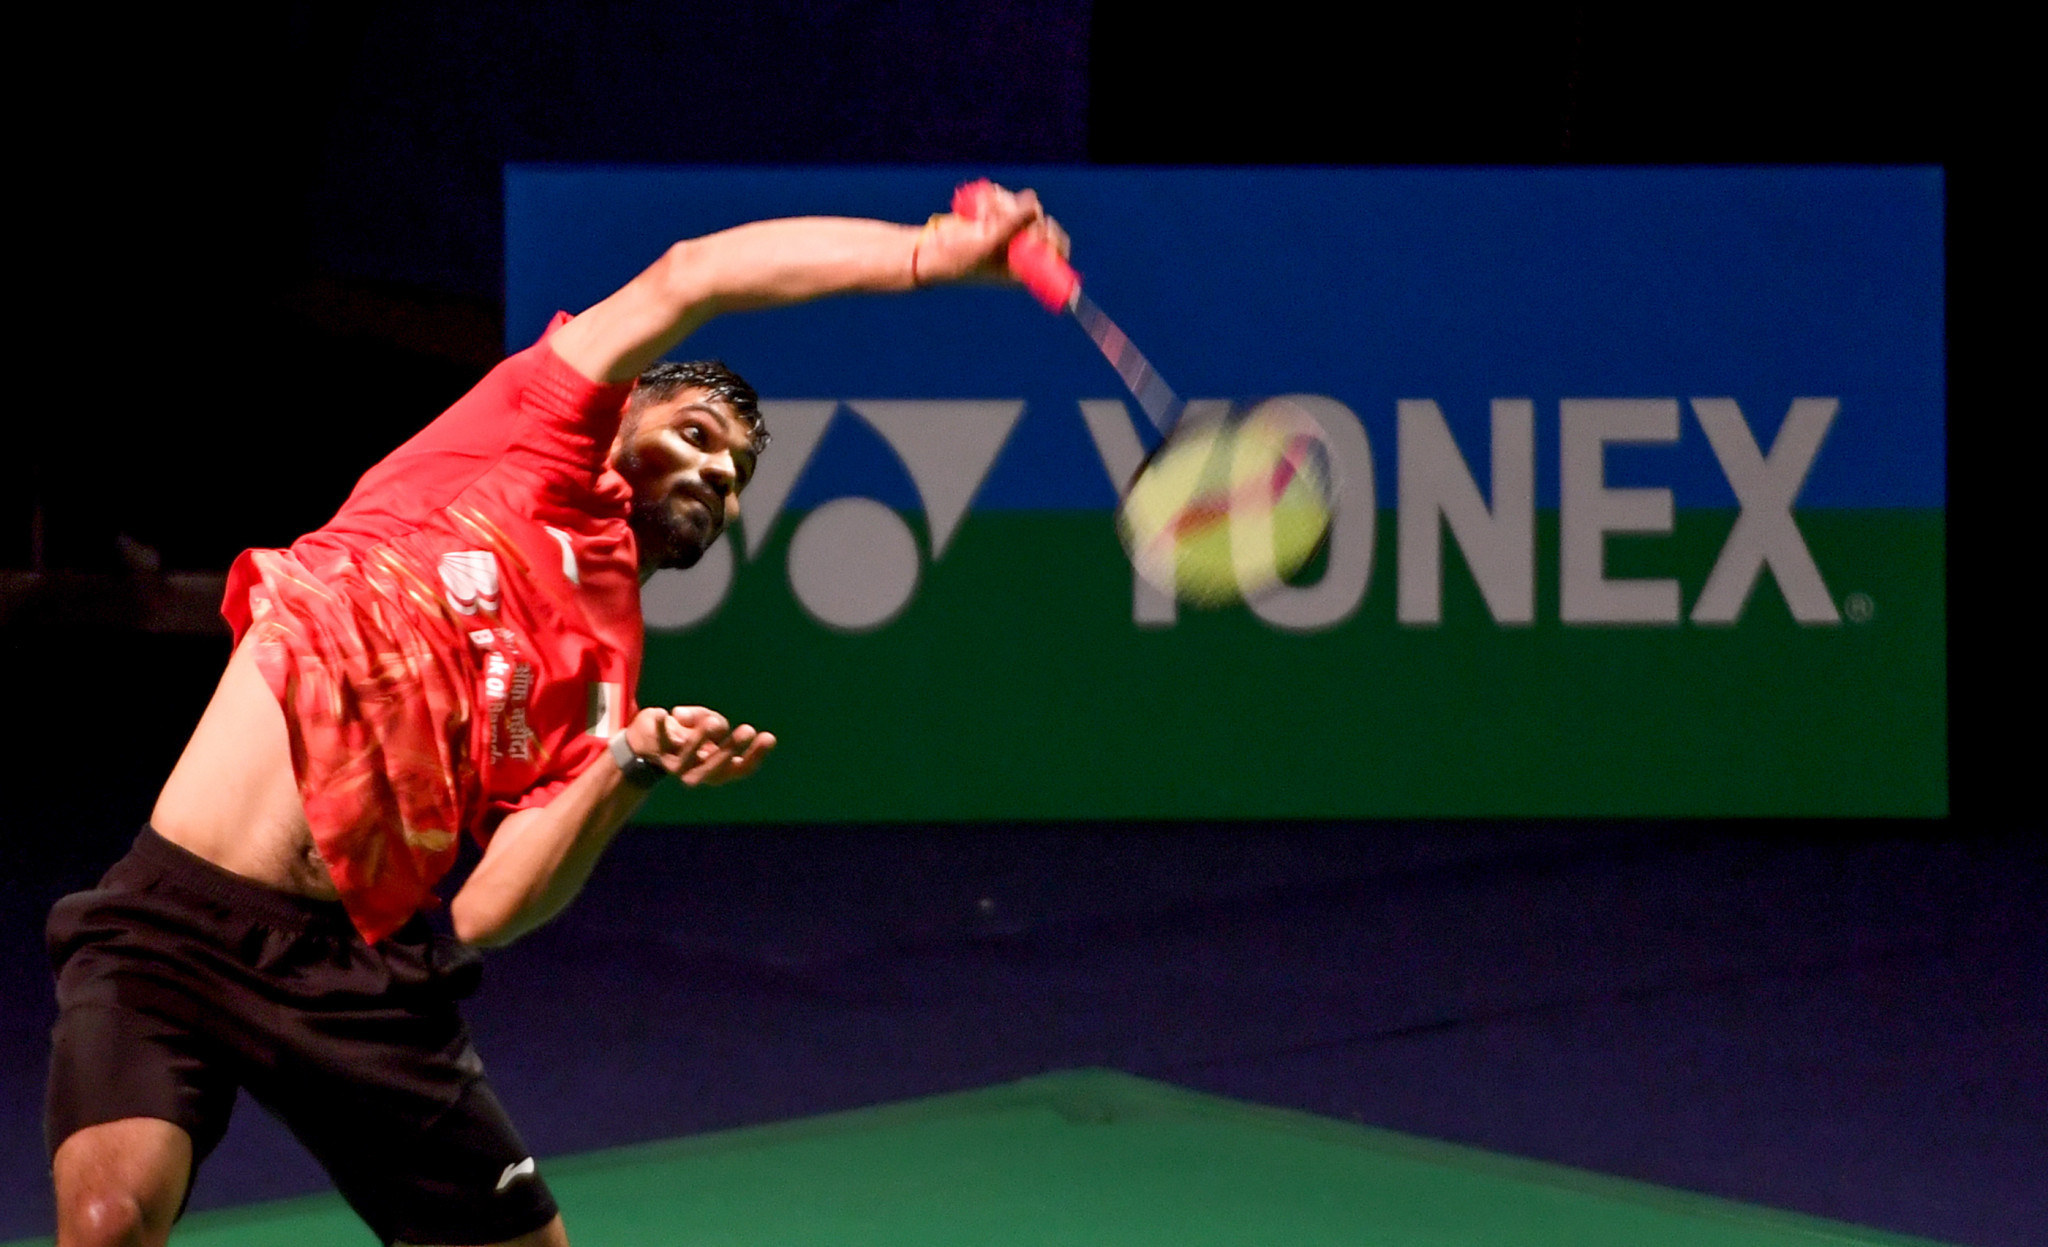 Srikanth Kidambi battled back to reach his home final at the Badminton World Federation India Open in New Delhi ©Getty Images